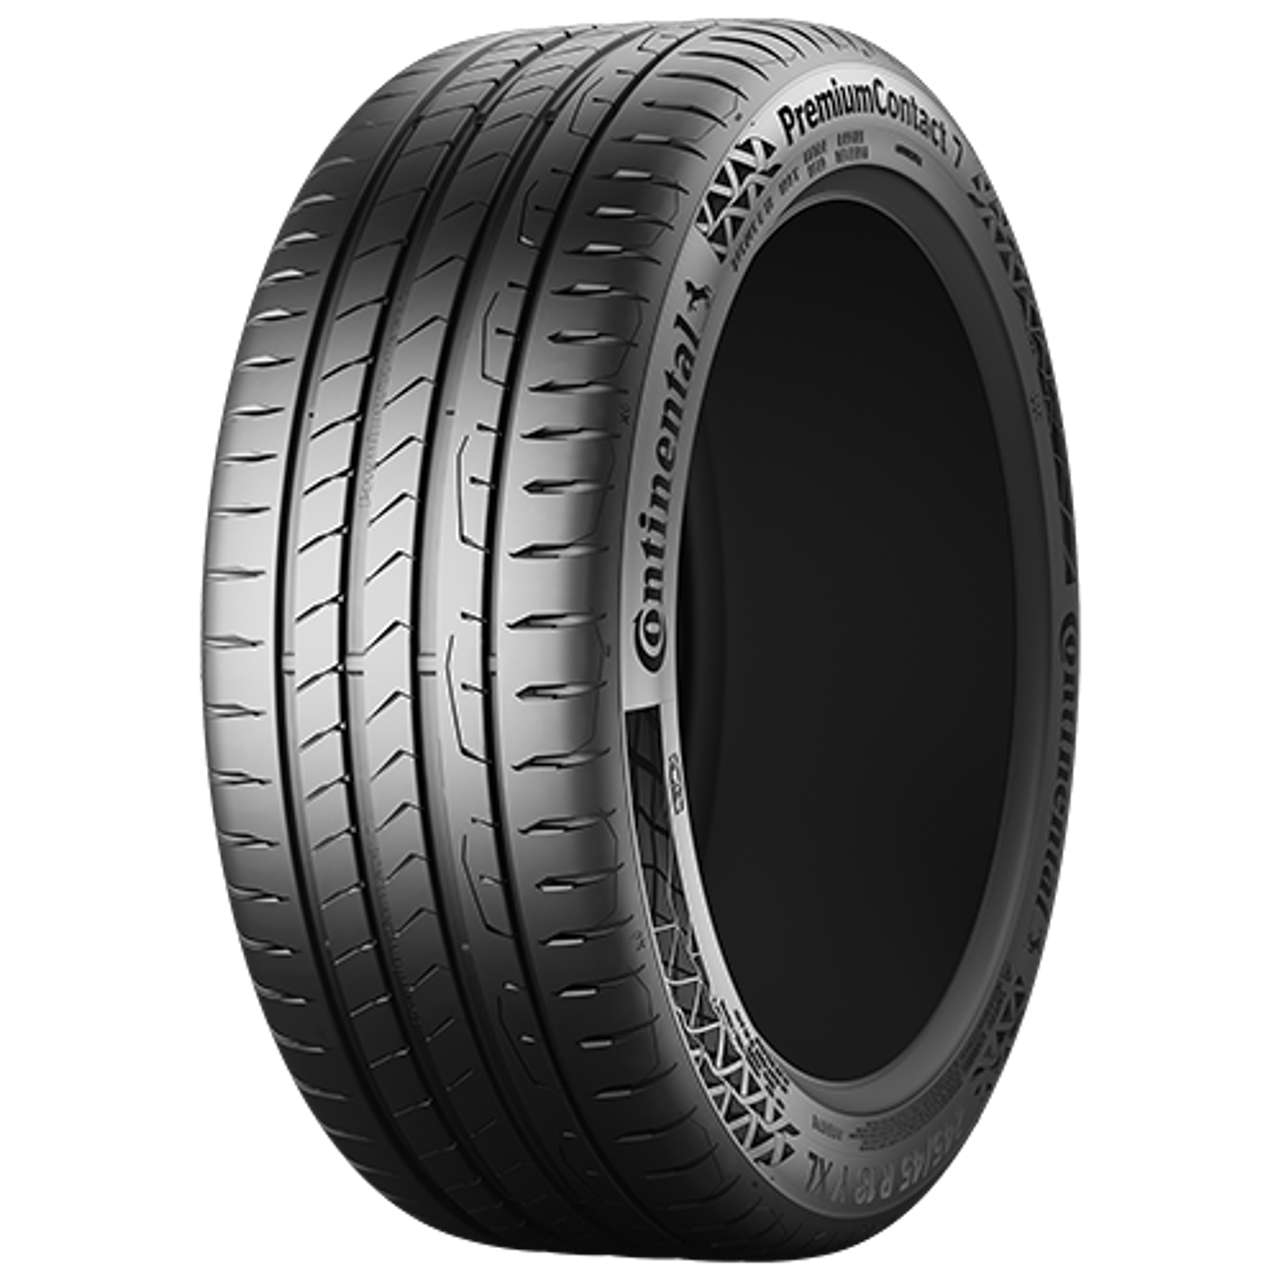 CONTINENTAL PREMIUMCONTACT 7 (EVc) 225/50R17 94Y FR BSW